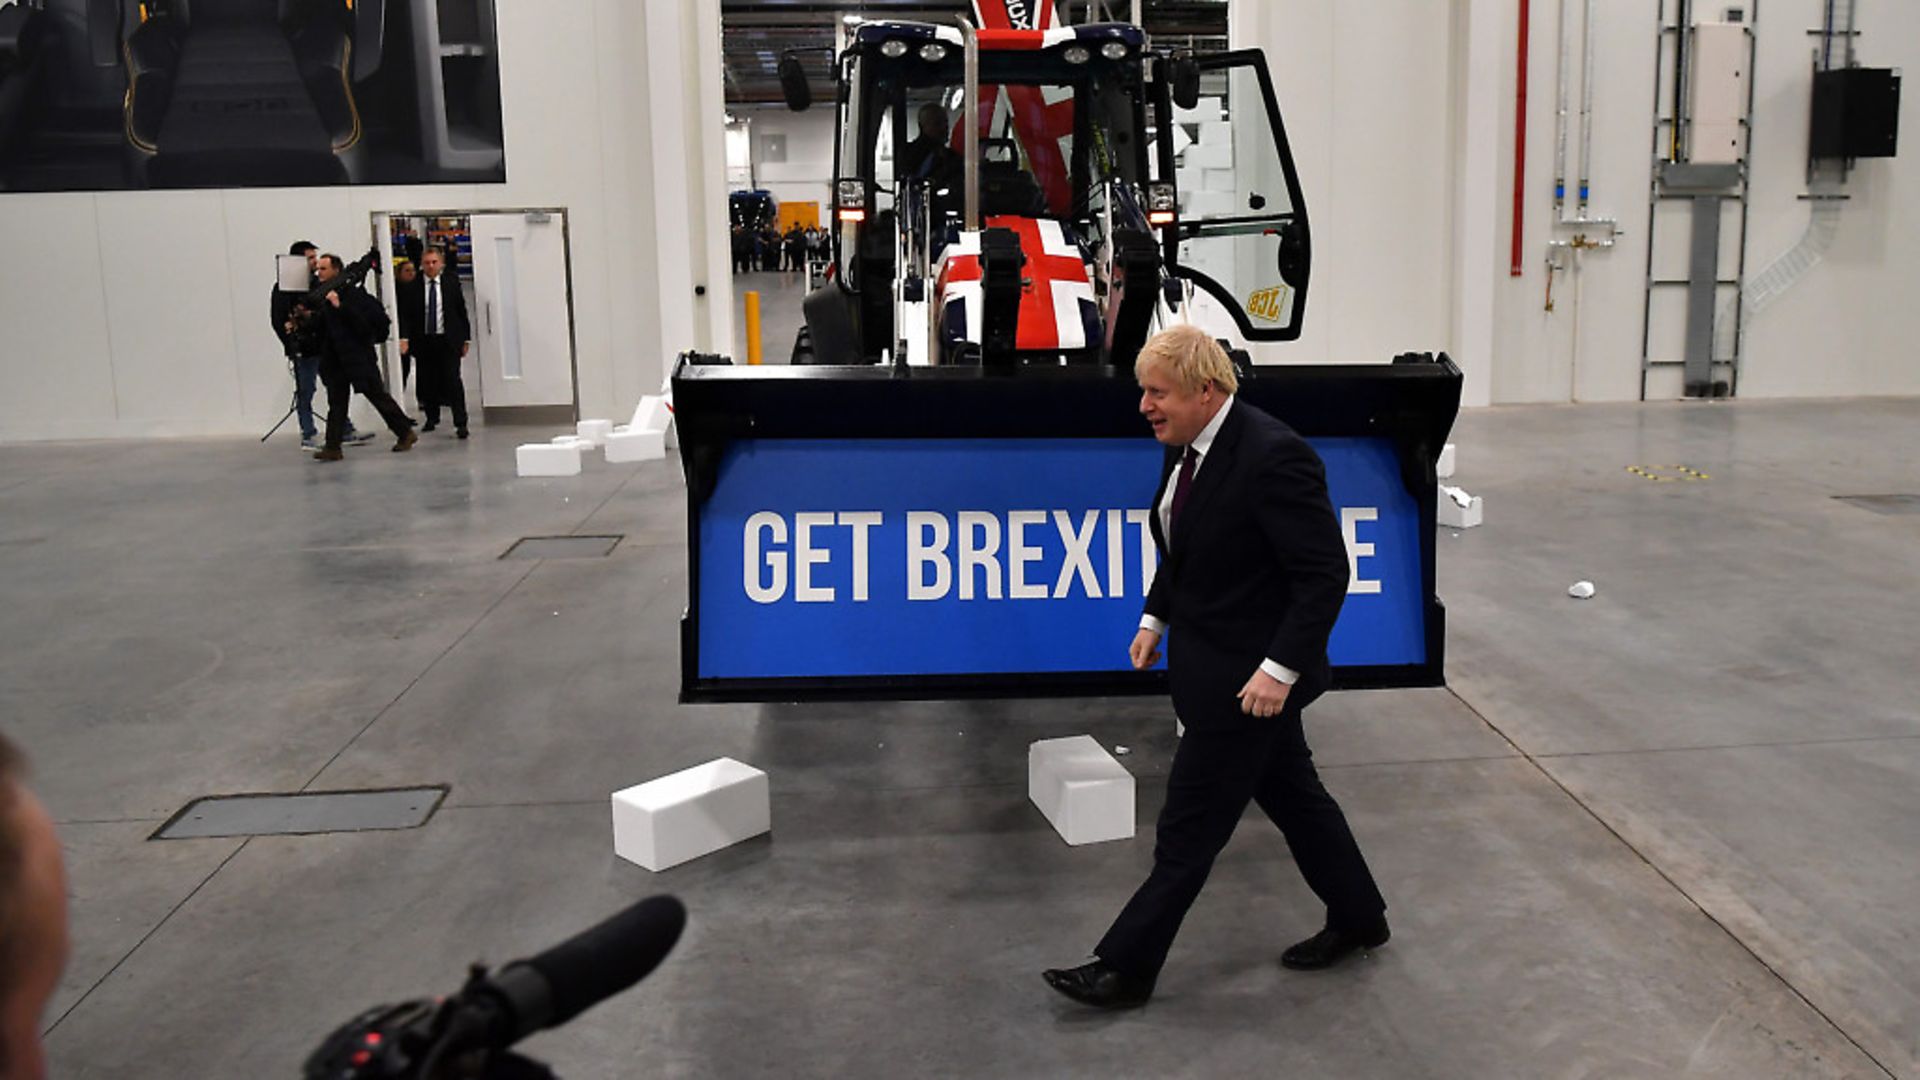 Boris Johnson walks past a Union flag-themed JCB, after driving it through a fake wall emblazoned with the word "GRIDLOCK", during a general election campaign event at JCB construction company. (Photo by Ben Stansall - WPA Pool/Getty Images) - Credit: Getty Images